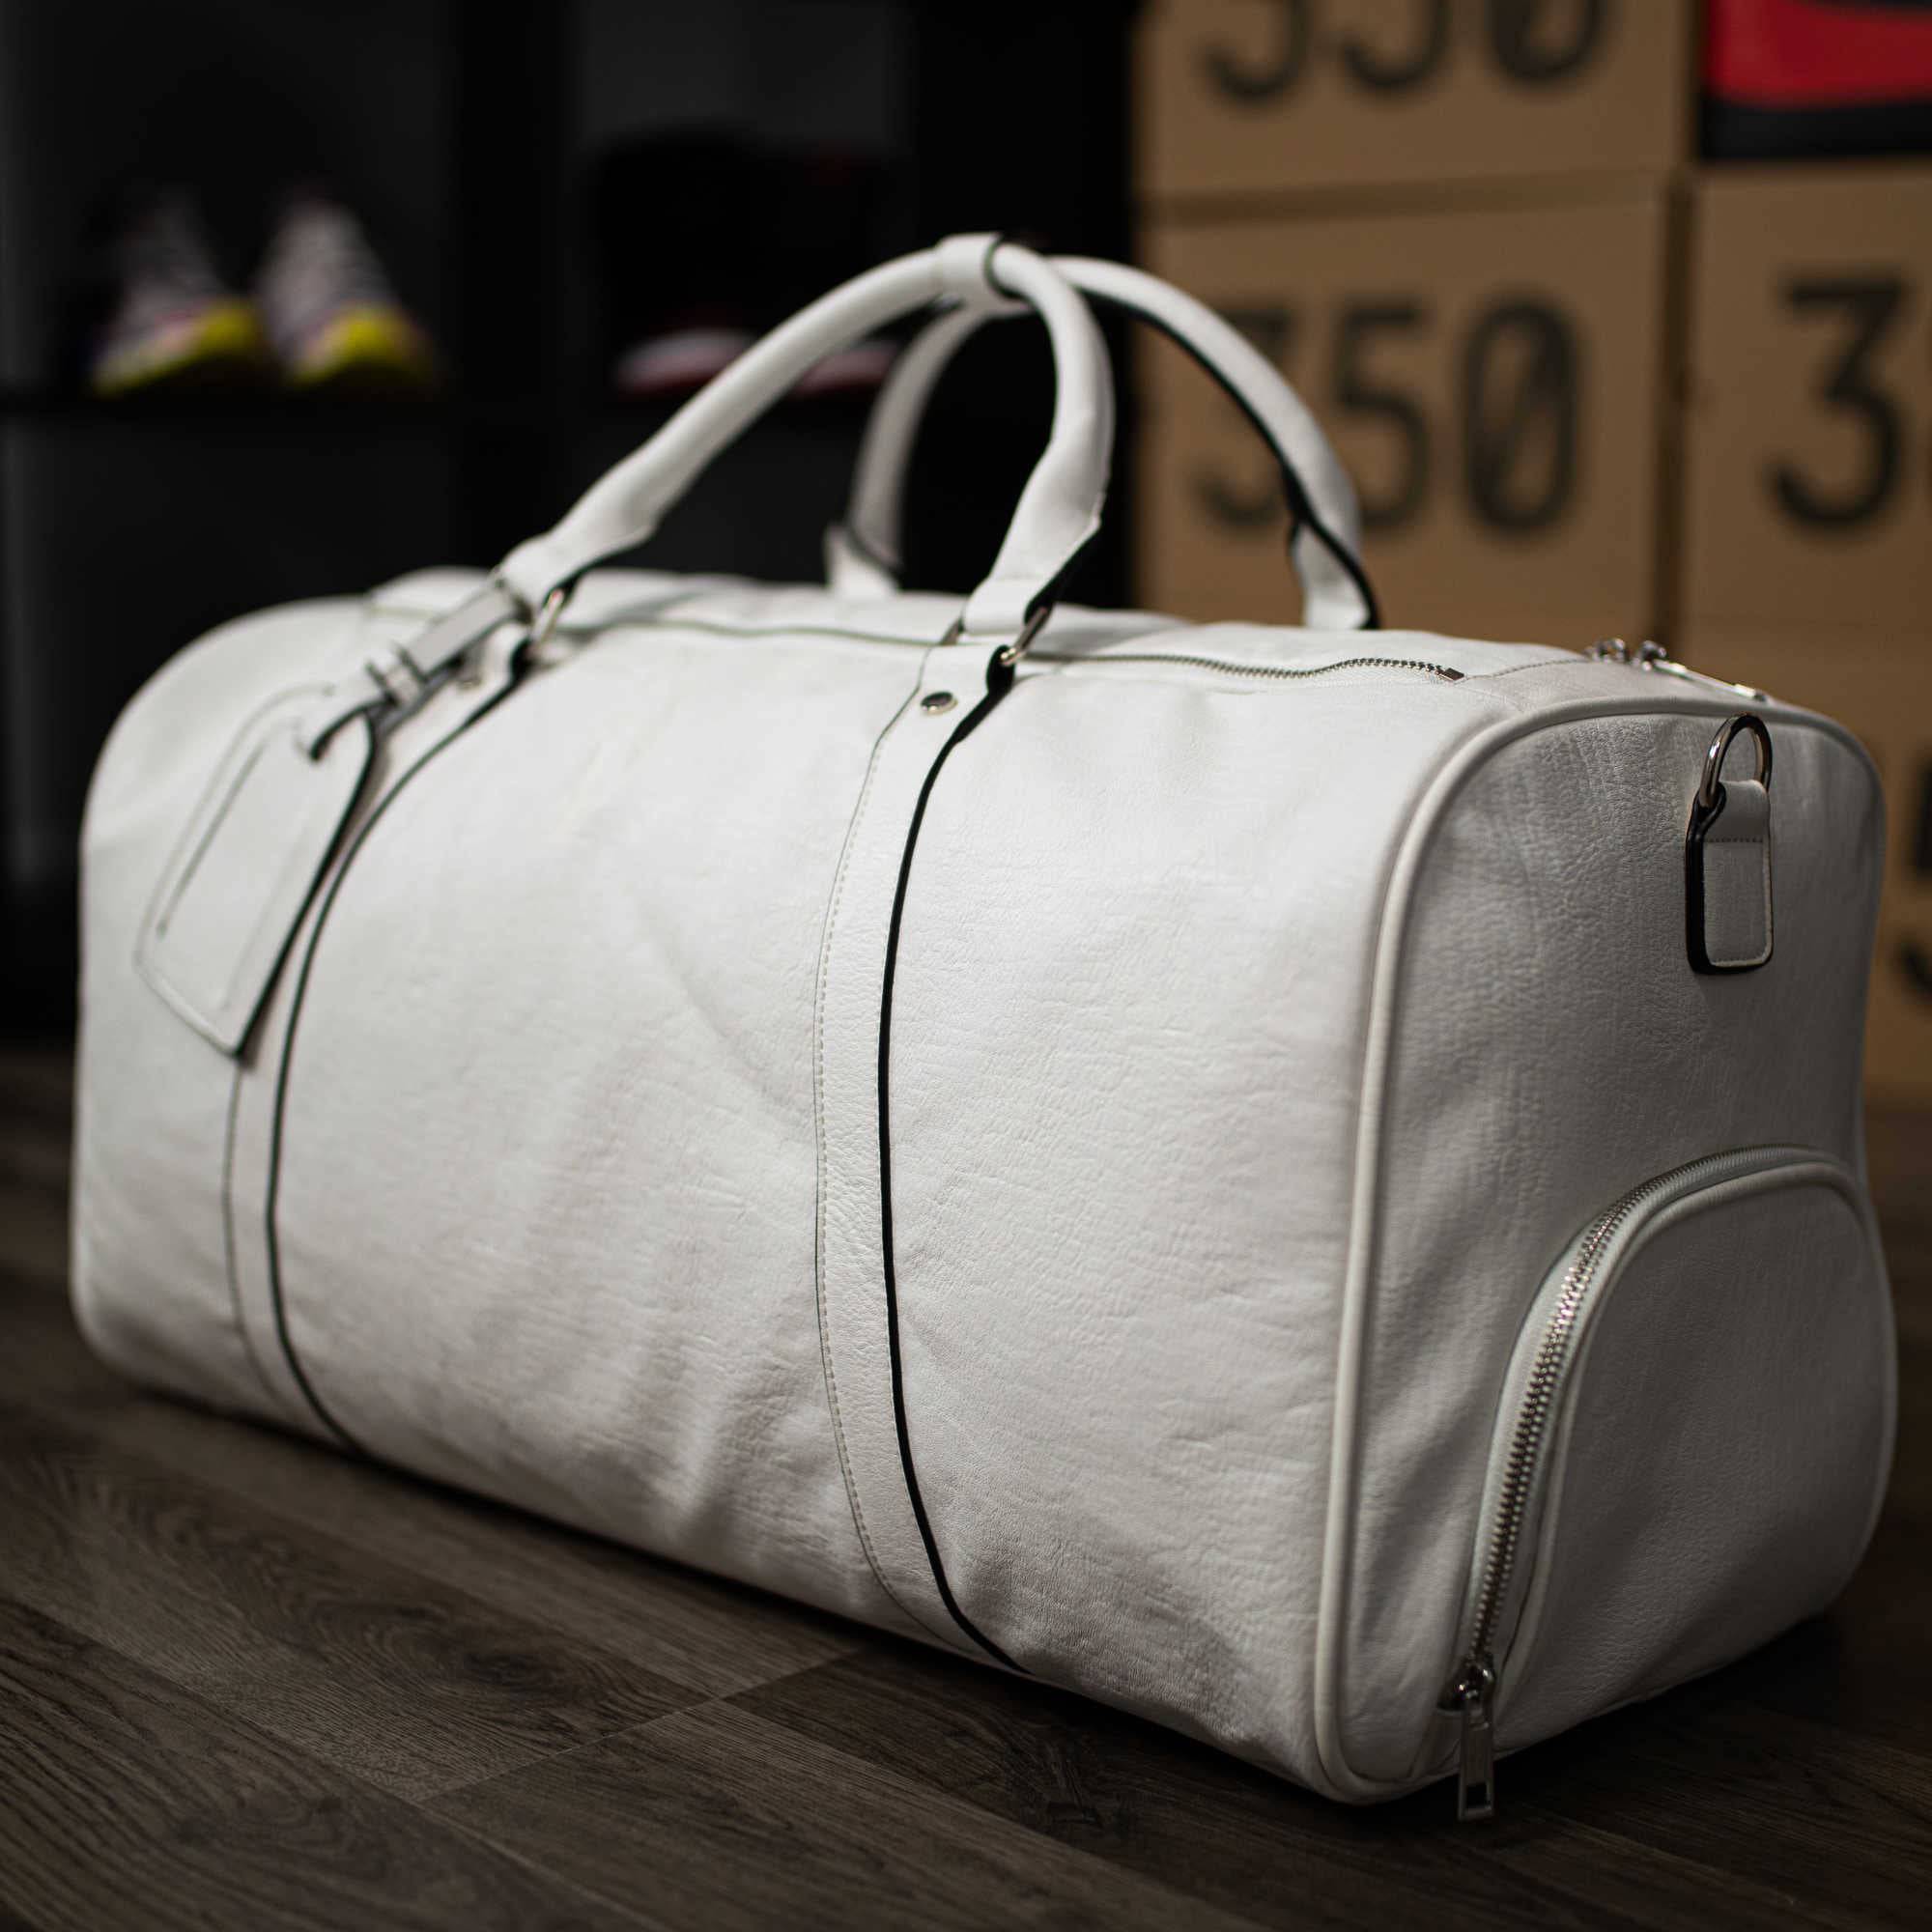 White Tumbled Leather 2 Bag Set (Commuter and Duffle) - Sole Premise